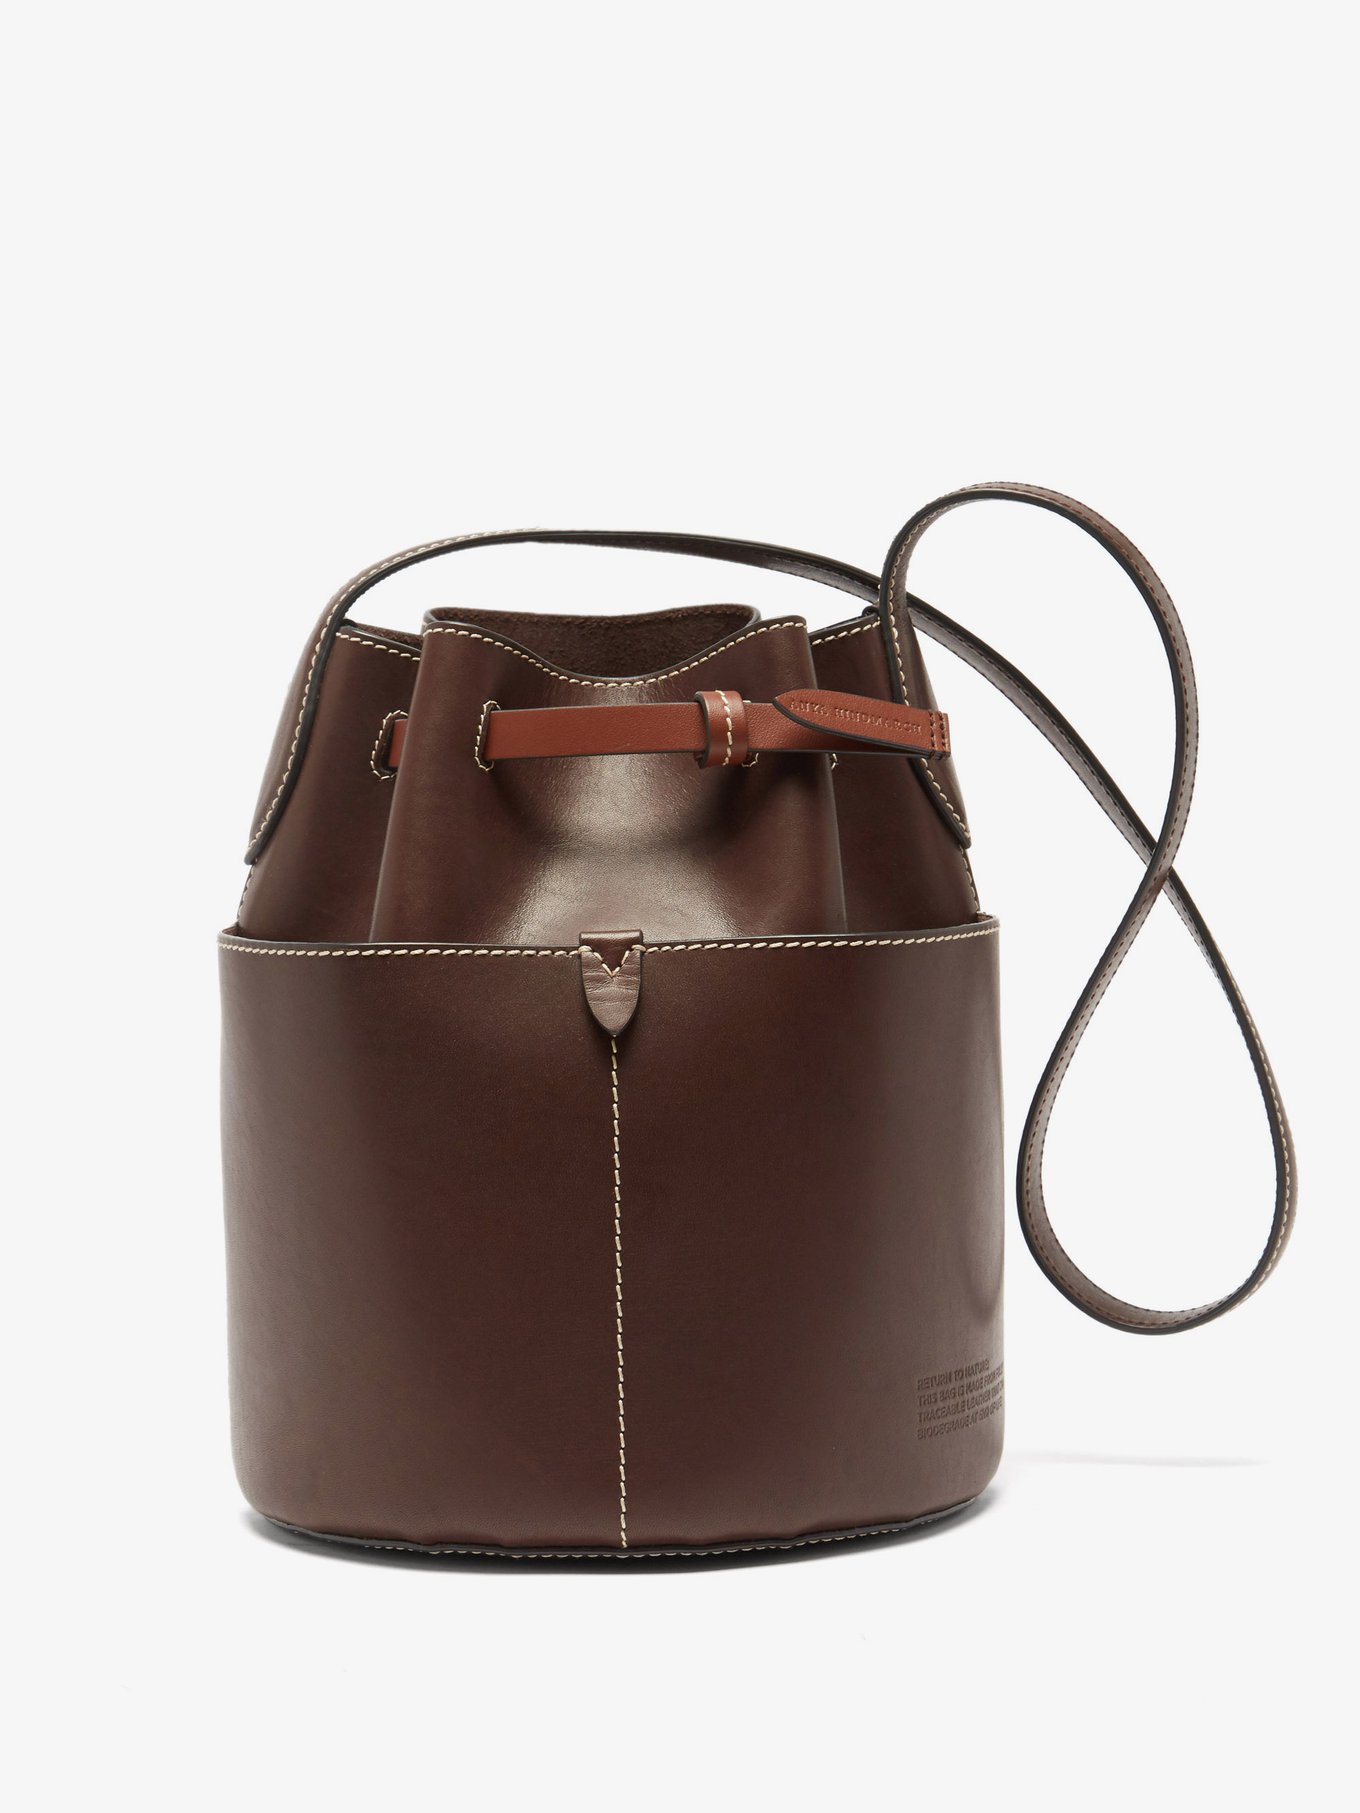 Return to Nature small leather bucket bag | Anya Hindmarch